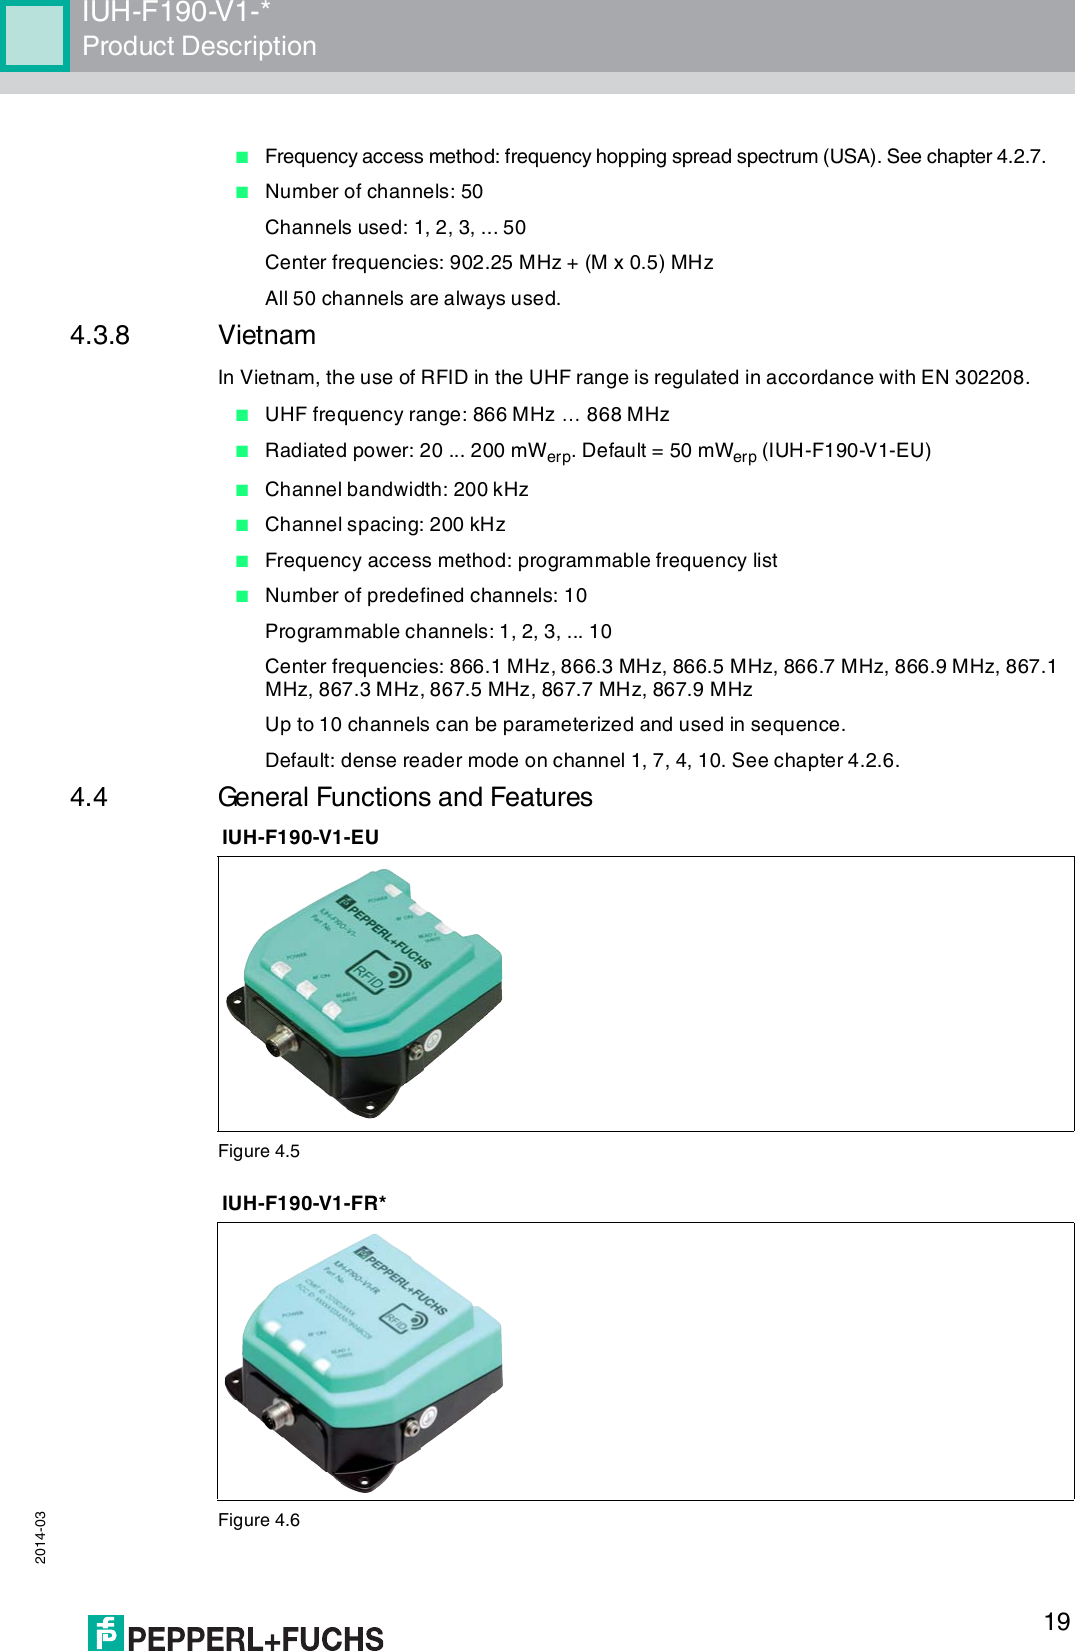 IUH-F190-V1-*Product Description 2014-0319■Frequency access method: frequency hopping spread spectrum (USA). See chapter 4.2.7.■Number of channels: 50Channels used: 1, 2, 3, ... 50Center frequencies: 902.25 MHz + (M x 0.5) MHzAll 50 channels are always used.4.3.8 VietnamIn Vietnam, the use of RFID in the UHF range is regulated in accordance with EN 302208.■UHF frequency range: 866 MHz … 868 MHz■Radiated power: 20 ... 200 mWerp. Default = 50 mWerp (IUH-F190-V1-EU)■Channel bandwidth: 200 kHz■Channel spacing: 200 kHz■Frequency access method: programmable frequency list■Number of predefined channels: 10Programmable channels: 1, 2, 3, ... 10Center frequencies: 866.1 MHz, 866.3 MHz, 866.5 MHz, 866.7 MHz, 866.9 MHz, 867.1 MHz, 867.3 MHz, 867.5 MHz, 867.7 MHz, 867.9 MHzUp to 10 channels can be parameterized and used in sequence.Default: dense reader mode on channel 1, 7, 4, 10. See chapter 4.2.6.4.4 General Functions and FeaturesFigure 4.5Figure 4.6IUH-F190-V1-EUIUH-F190-V1-FR*